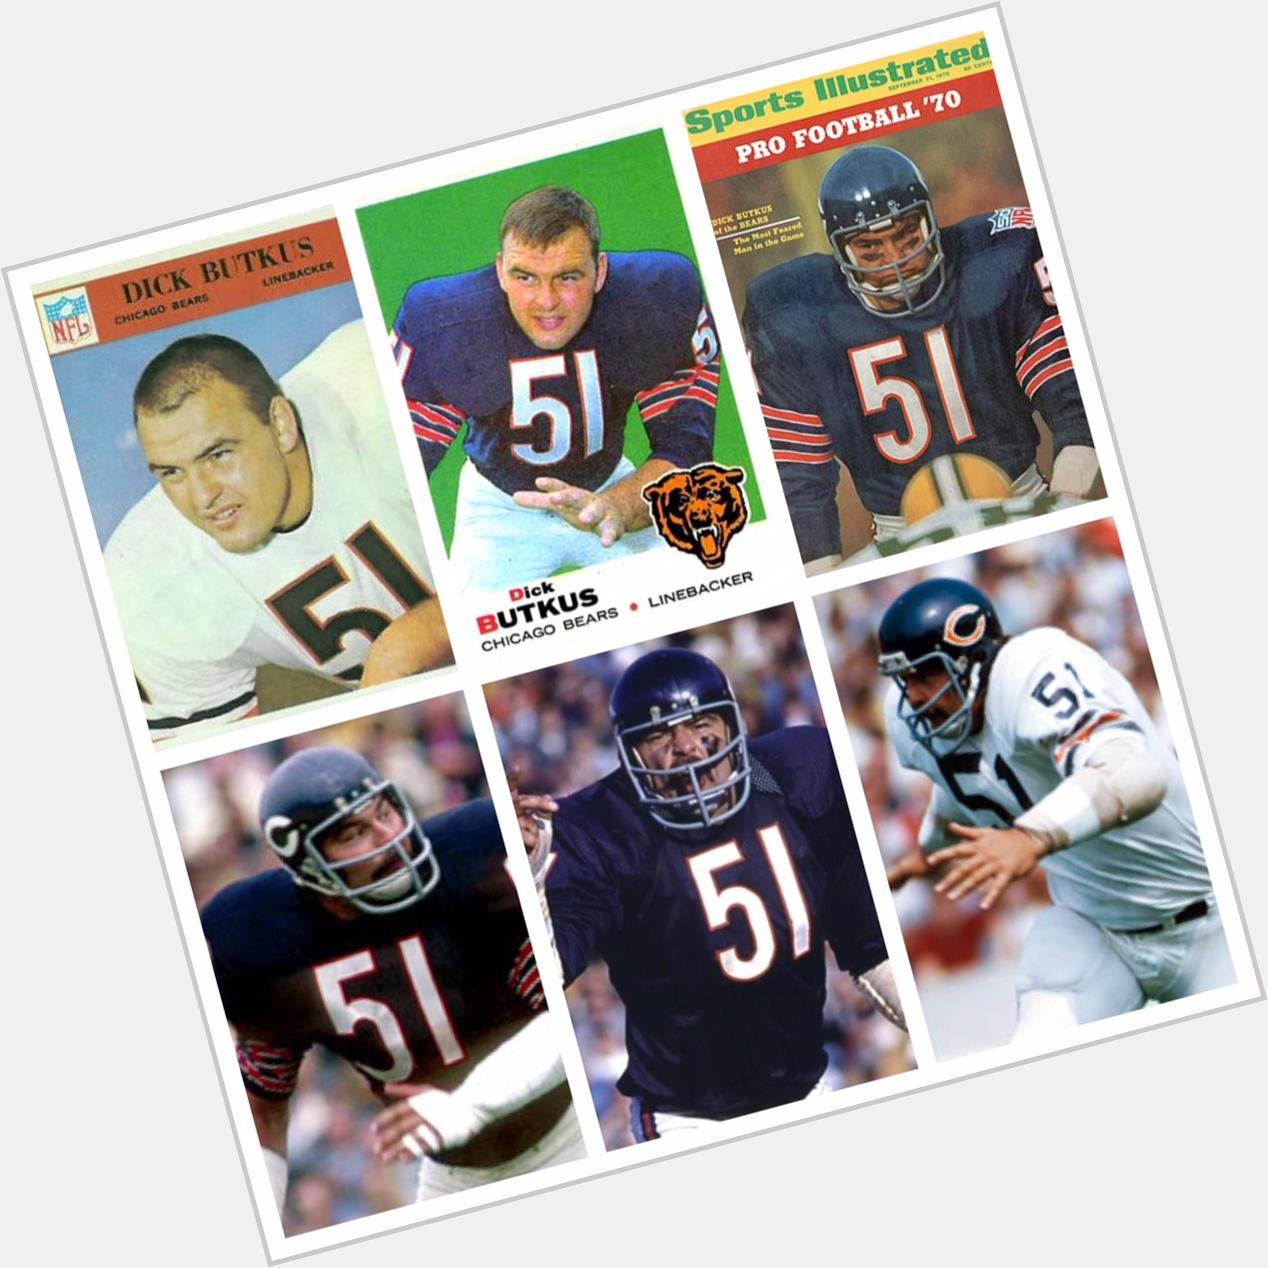 Happy Birthday to Dick Butkus born on this date in 1942    